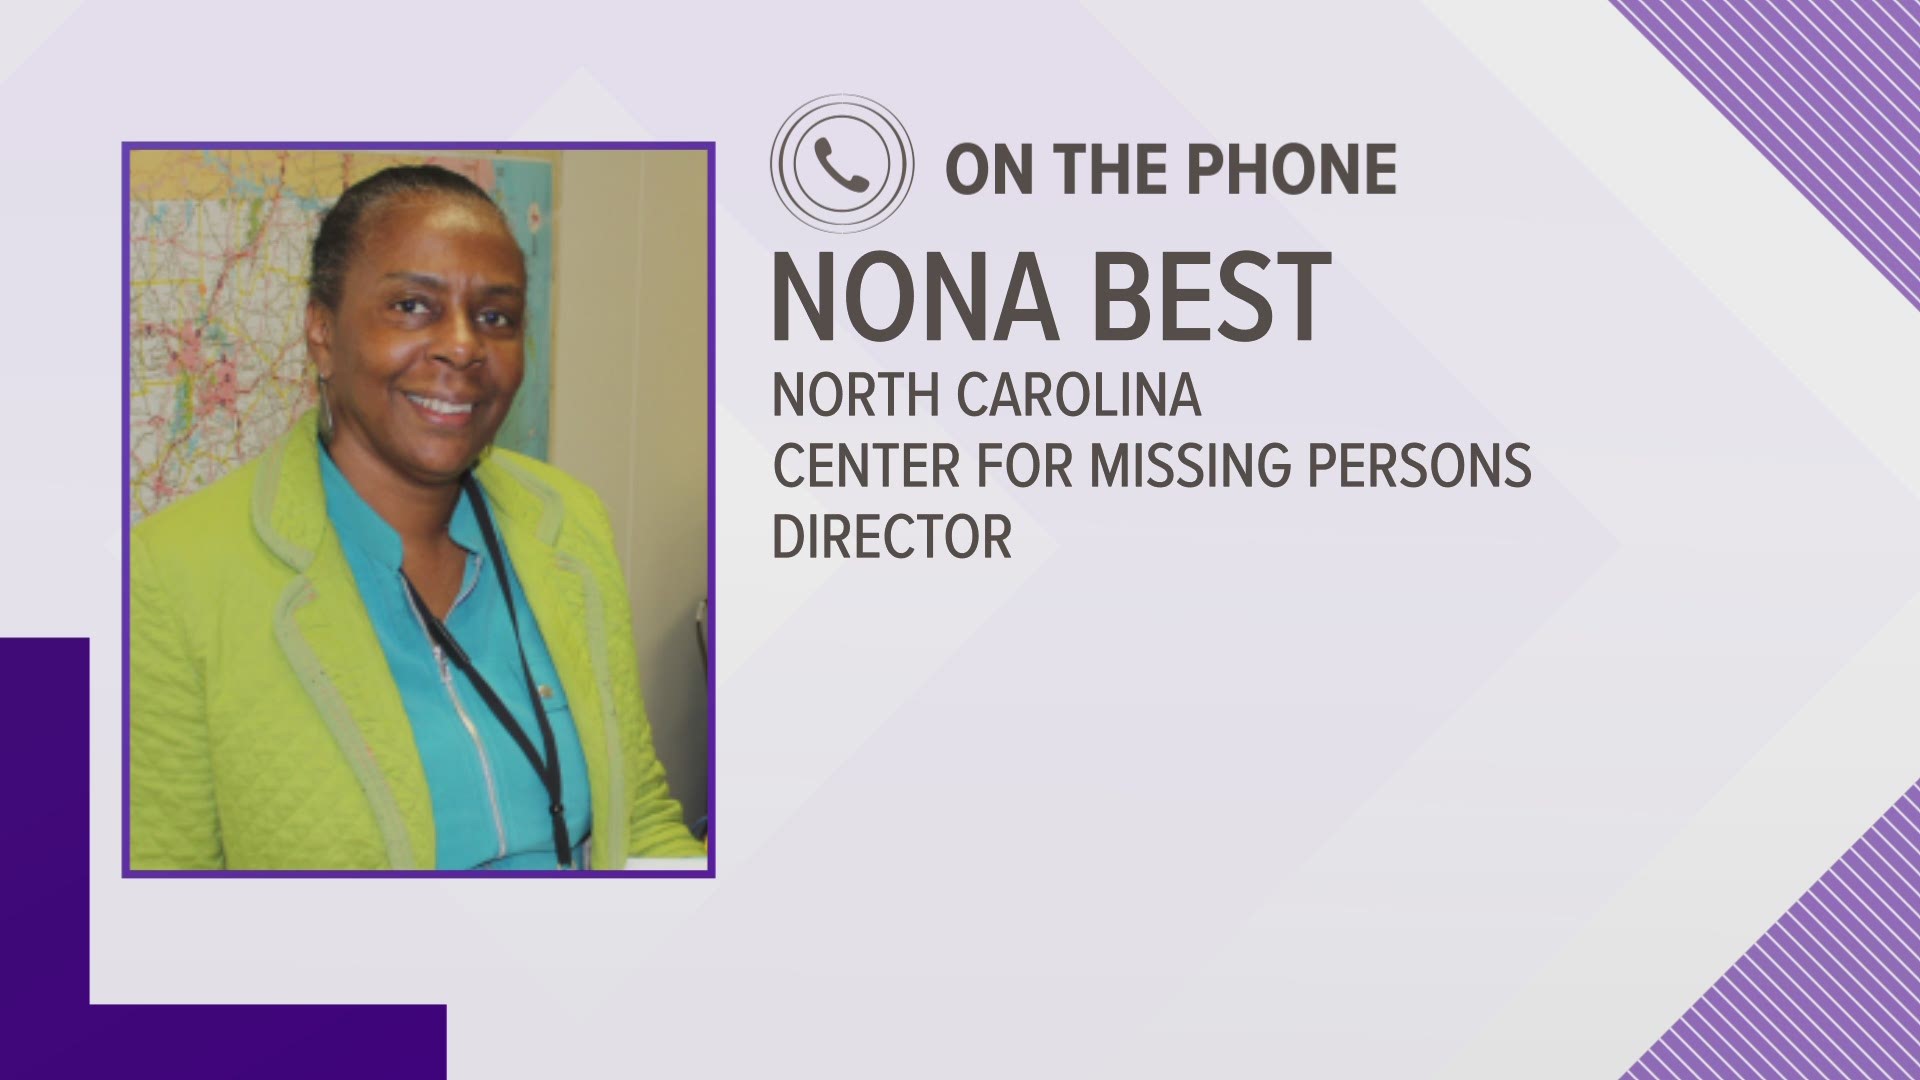 The NC Center for Missing Persons coordinator says the phone alert is secondary and was sent out before law enforcement confirmed the child had been located.